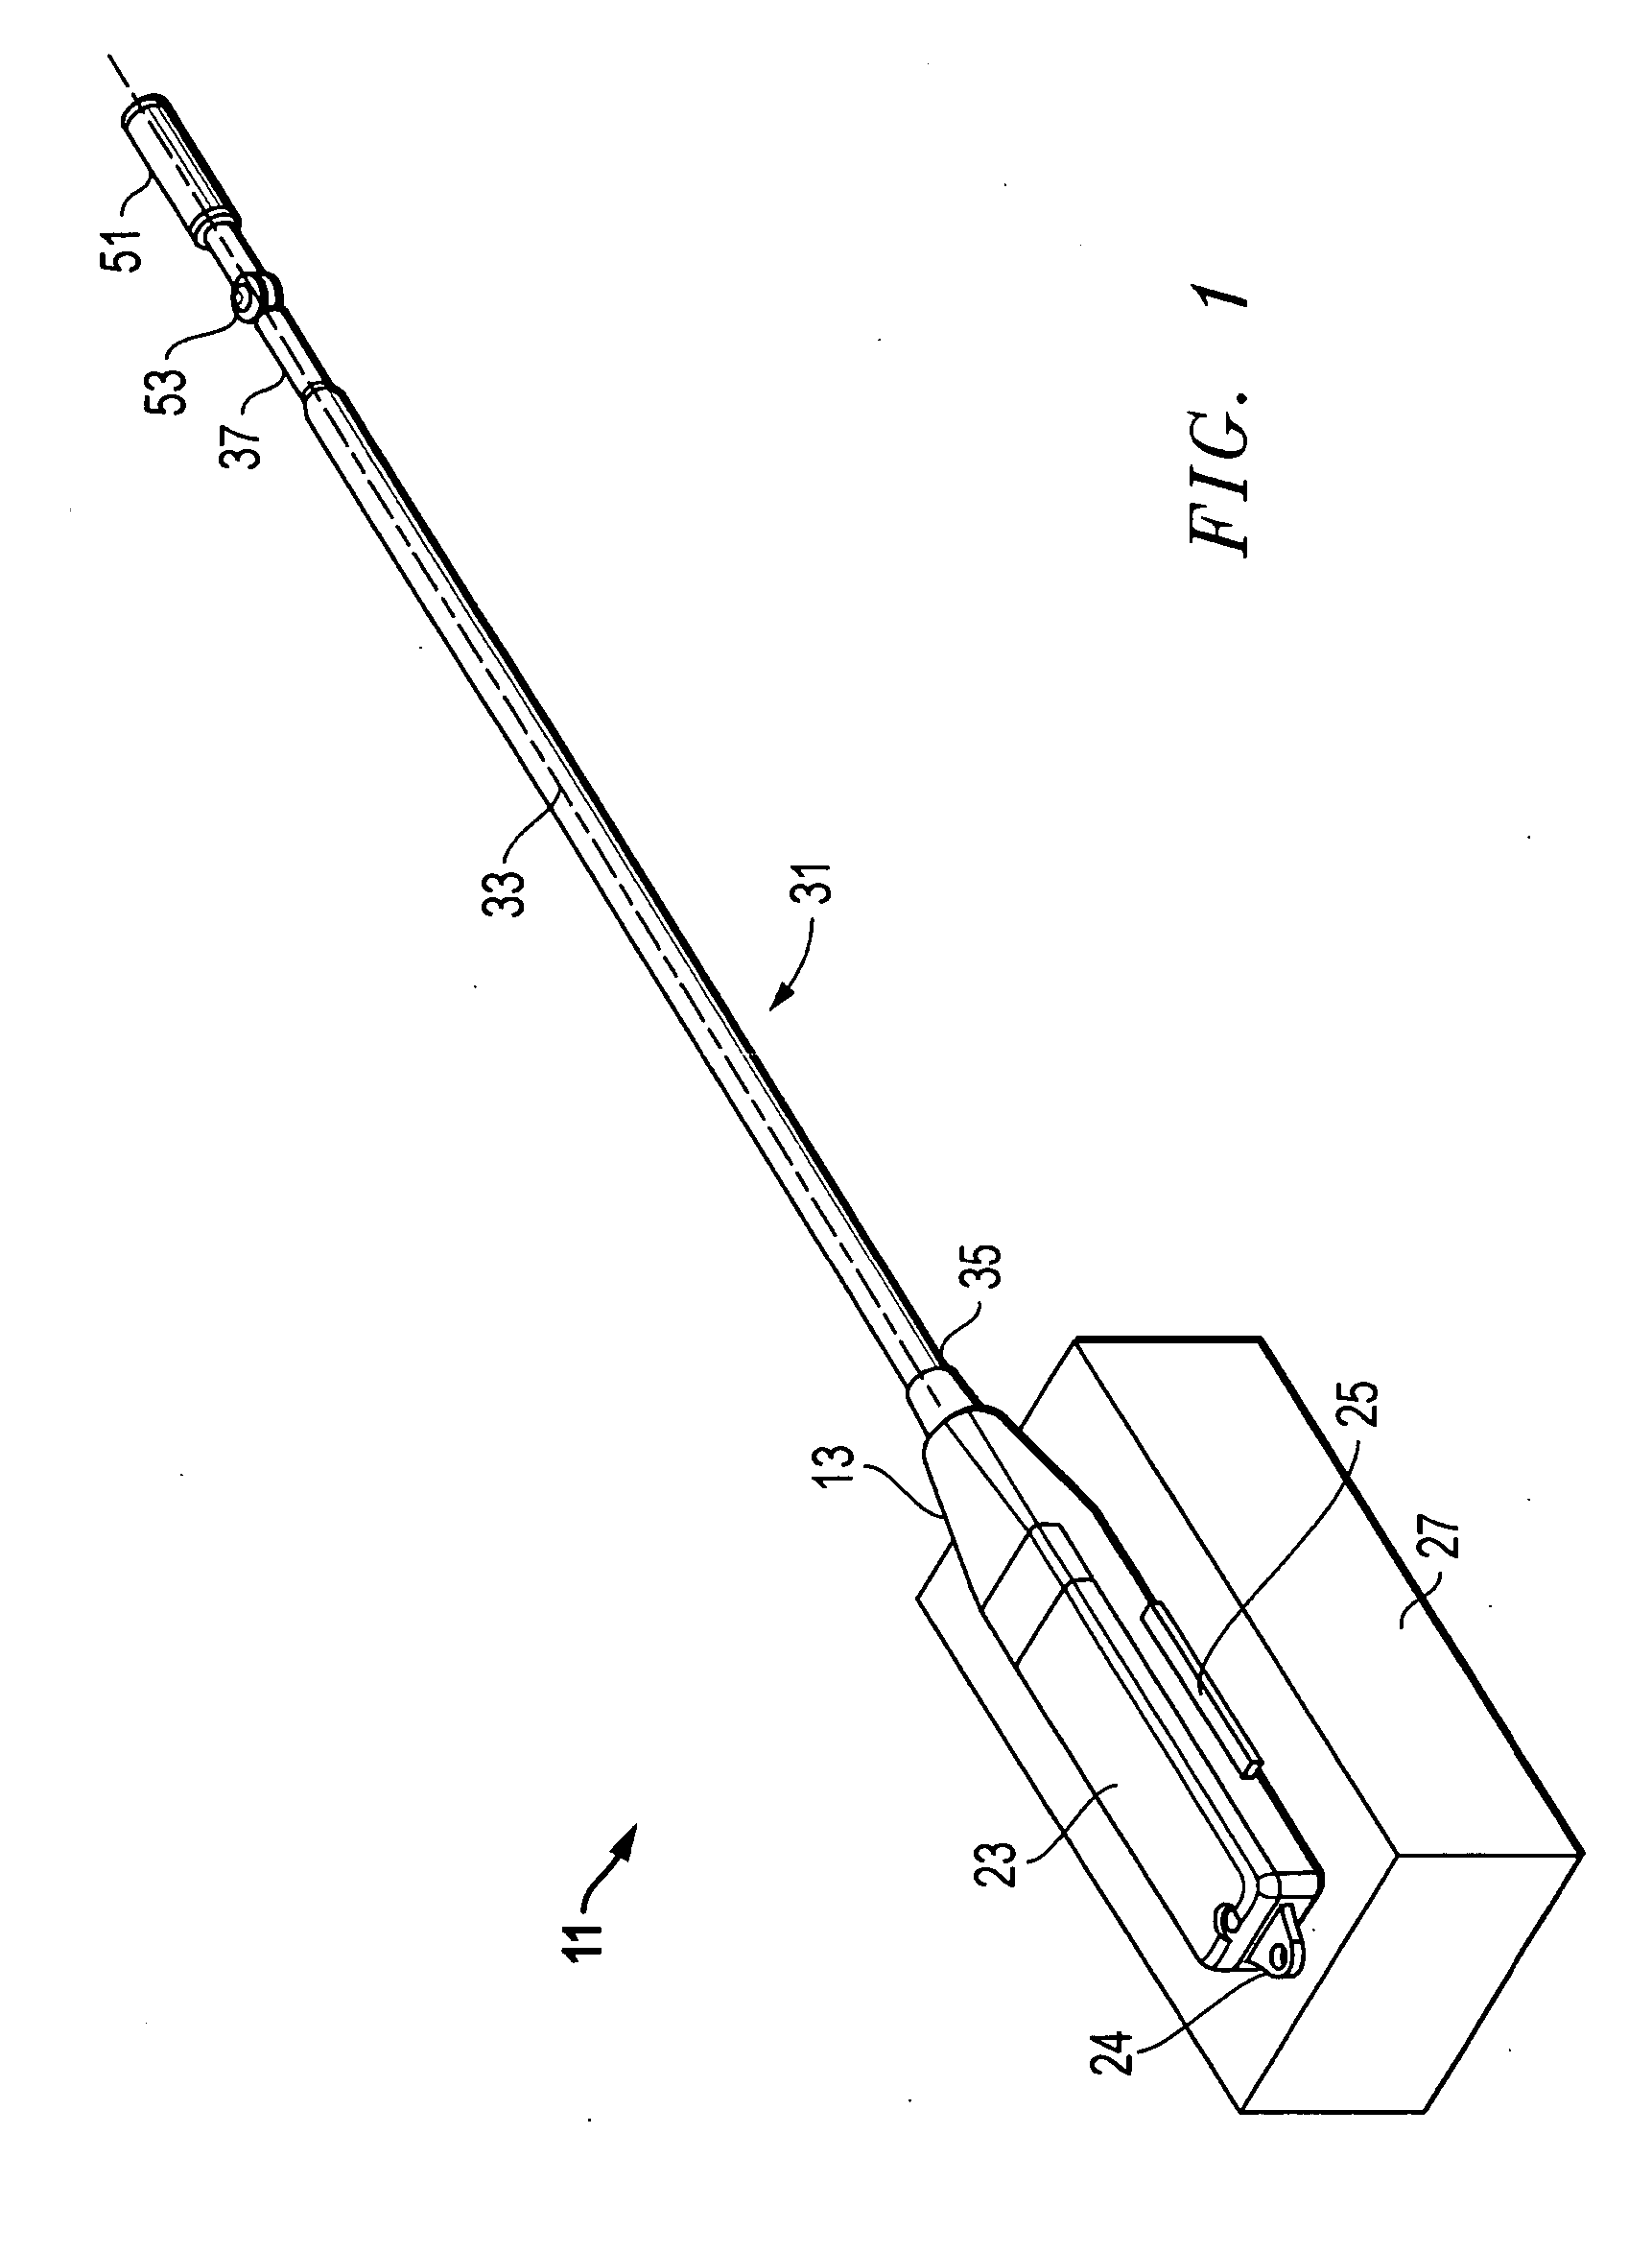 Highly articulated electromagnetic pick-up tool